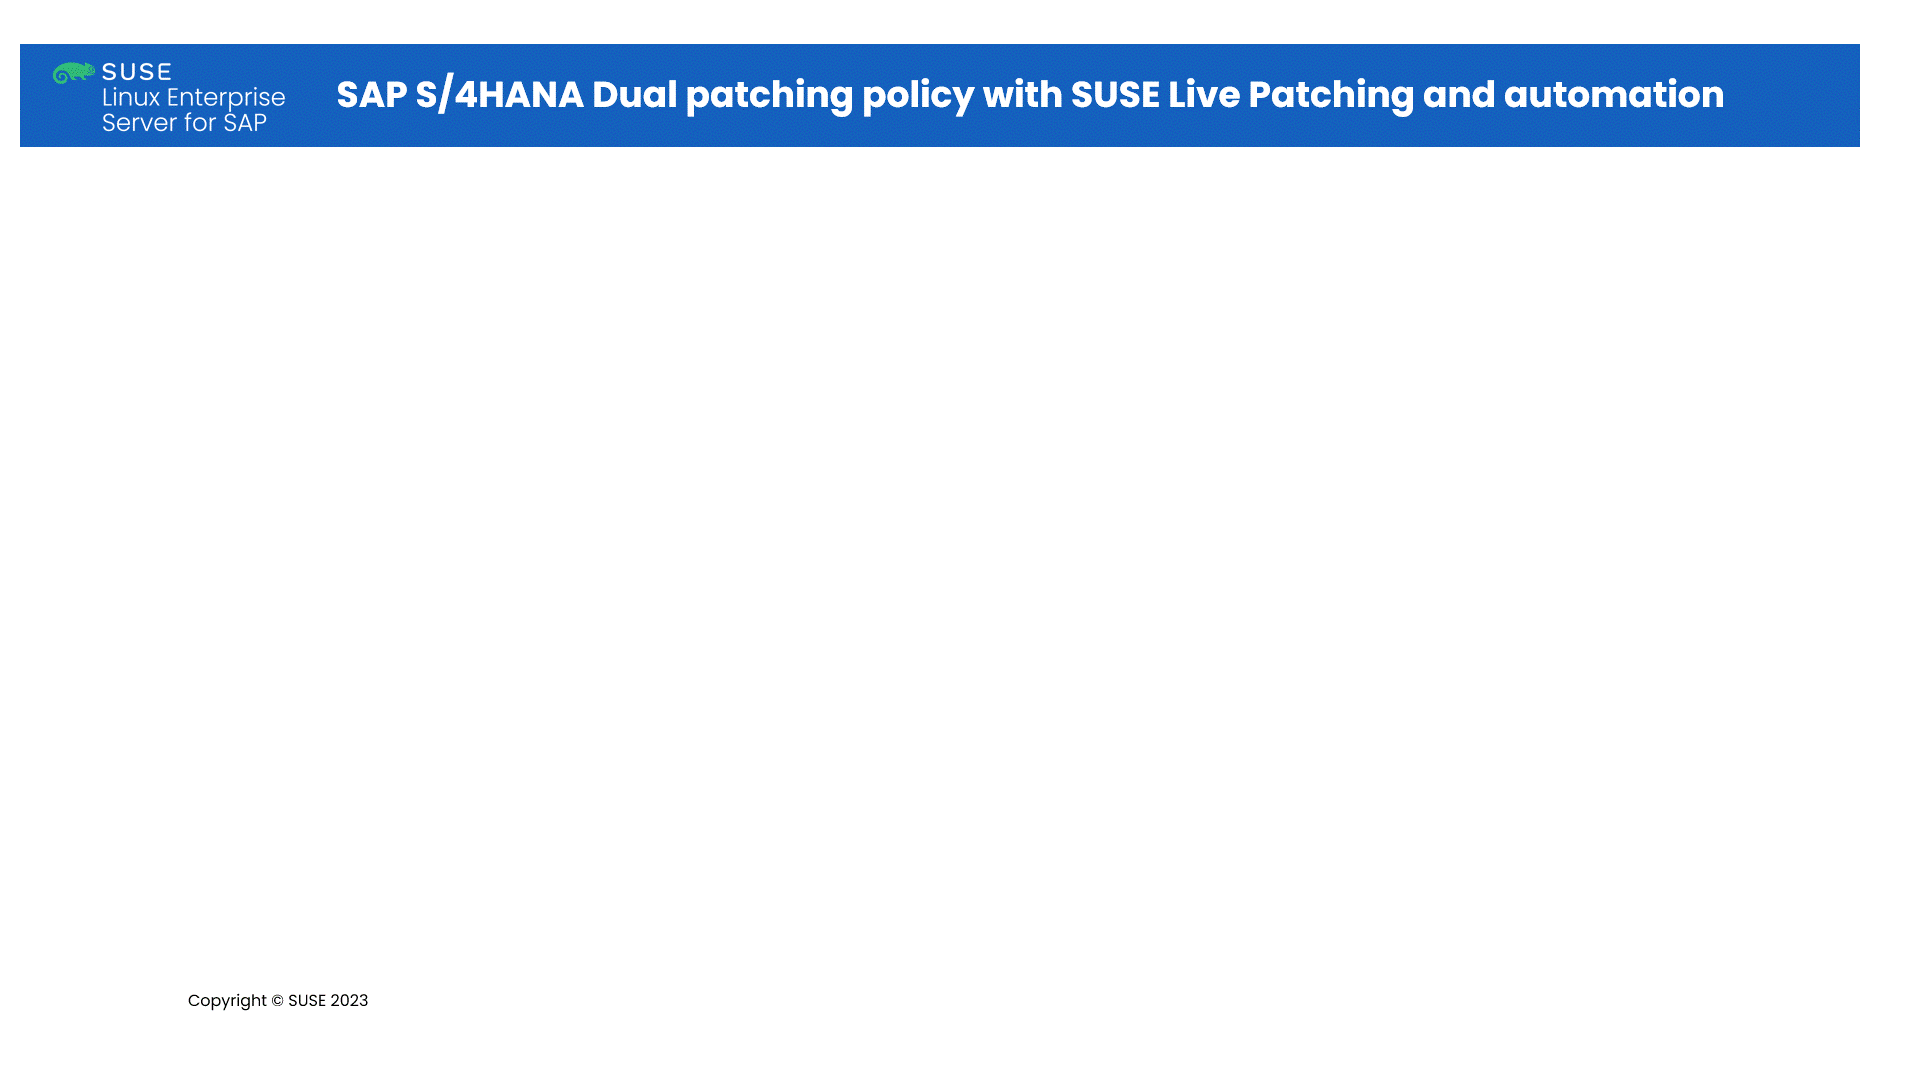 SAP S/4HANA Dual patching policy with SUSE Live Patching and automation